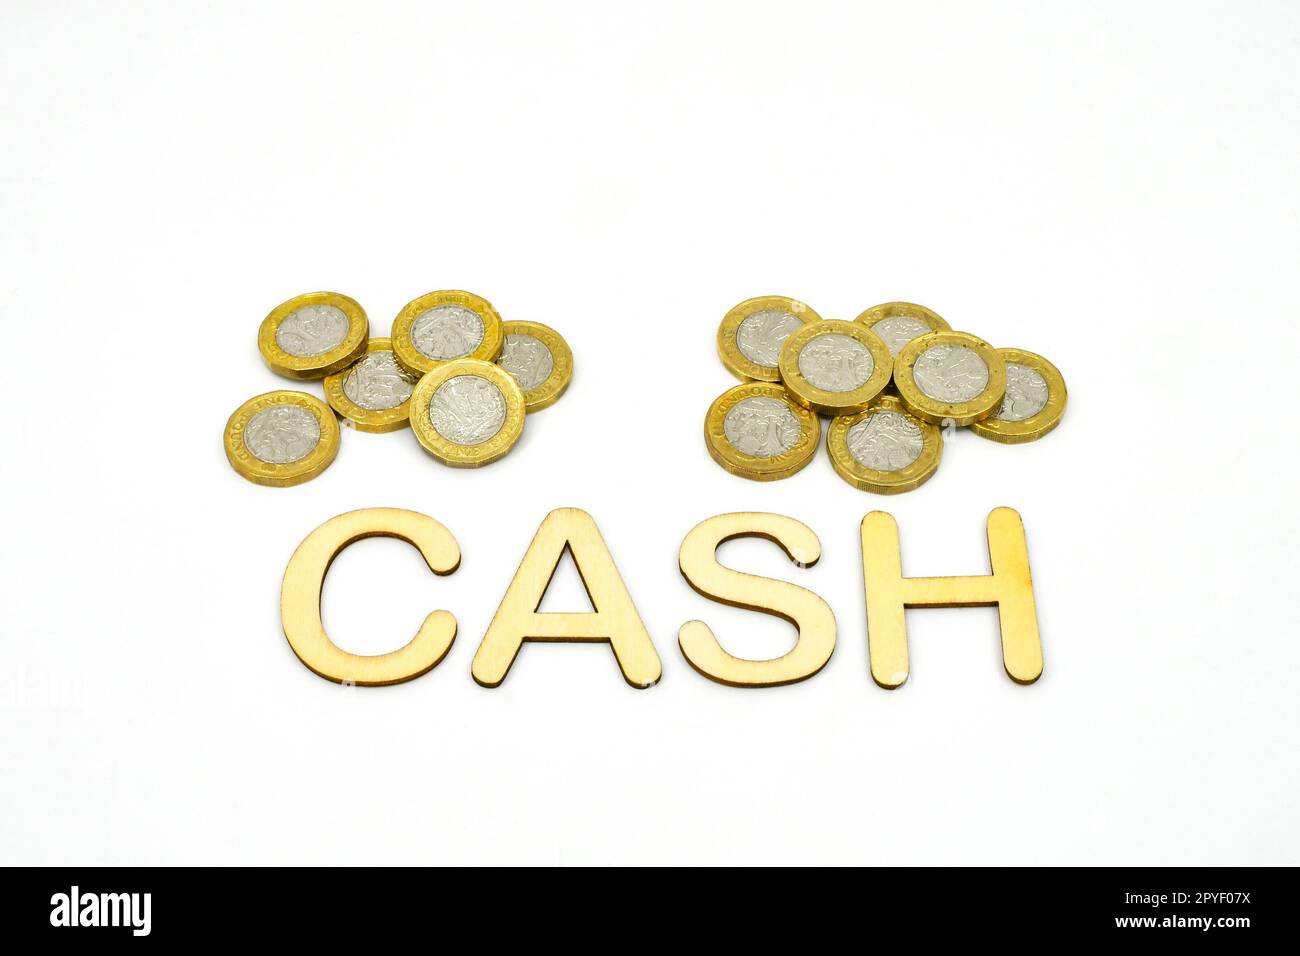 Word Cash in letters isolated on a plain white background with British one pound coins. Copy space. Spending concept. Stock Photo